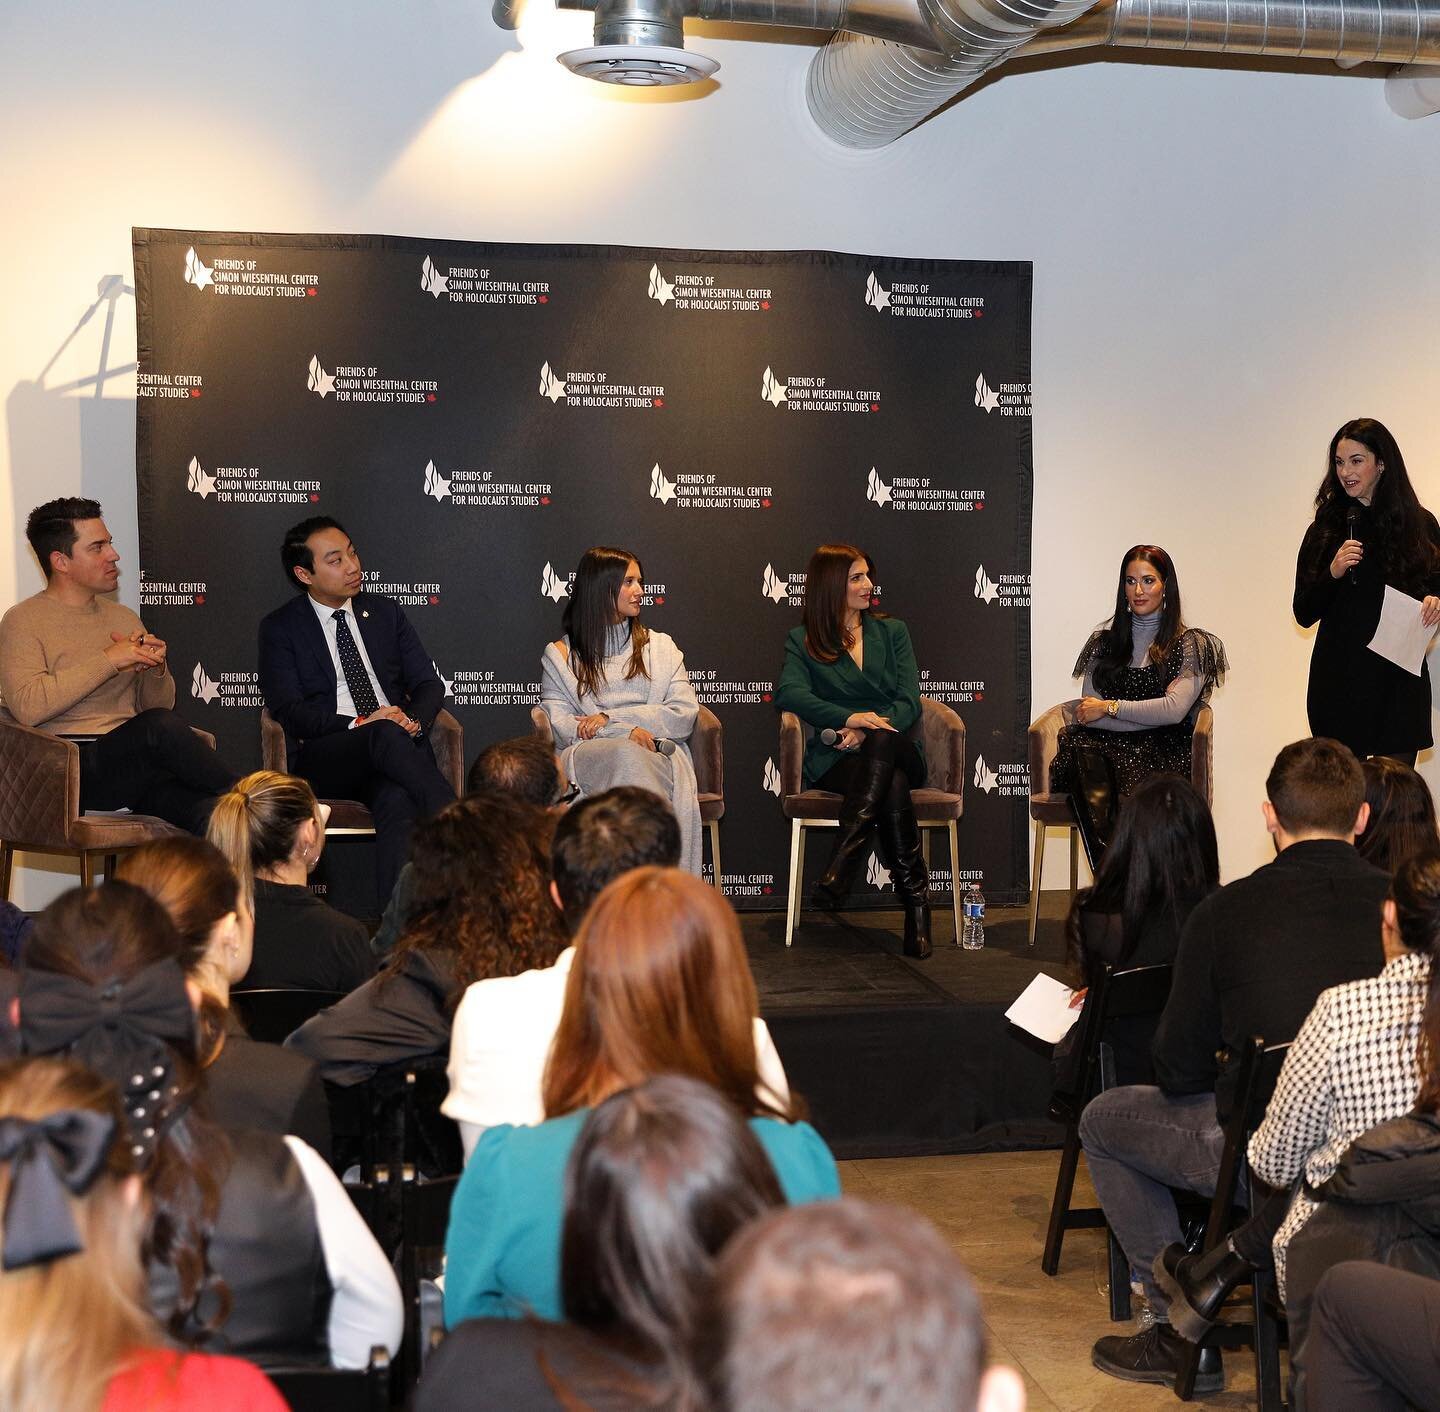 Bringing the community together through meaningful conversations, @gracevenue and @tobenfoodbydesign were proud to sponsor the Chanukah Panel Event, Enlightened Voices, hosted by generationNOW.

A big thank you to all the panelists for sharing their 